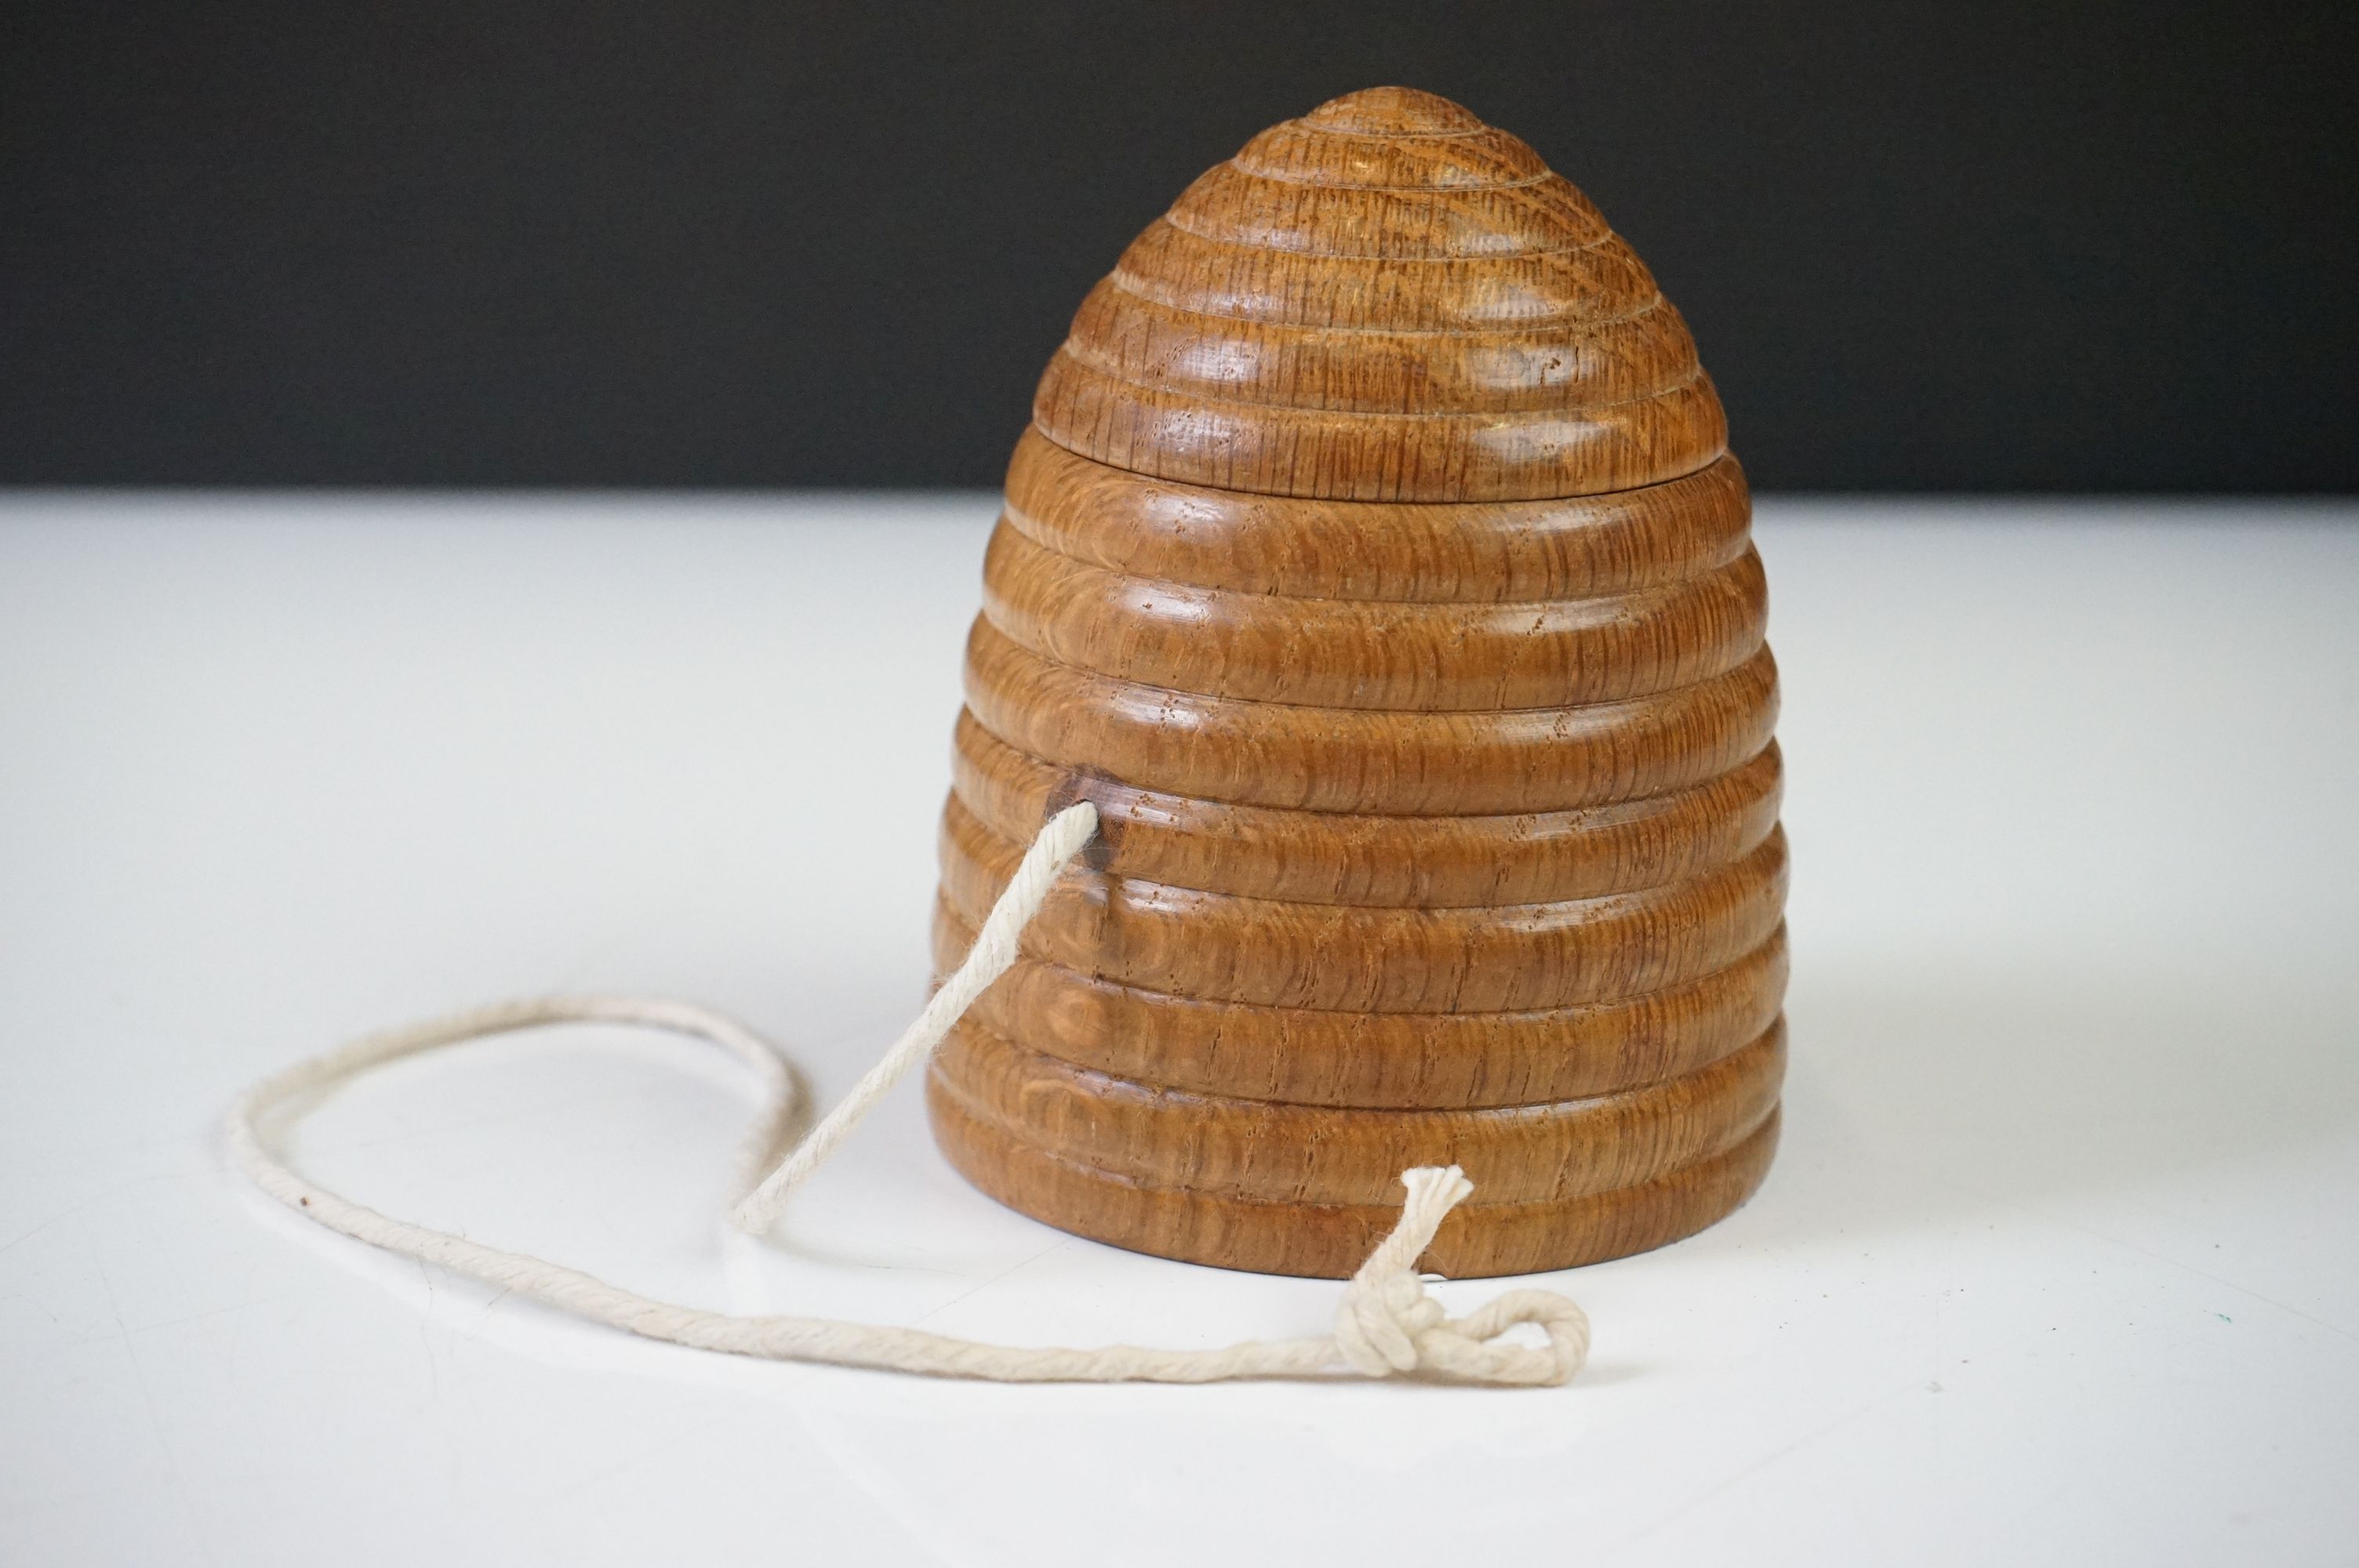 A vintage turned wooden string holder / dispenser in the form of a beehive.